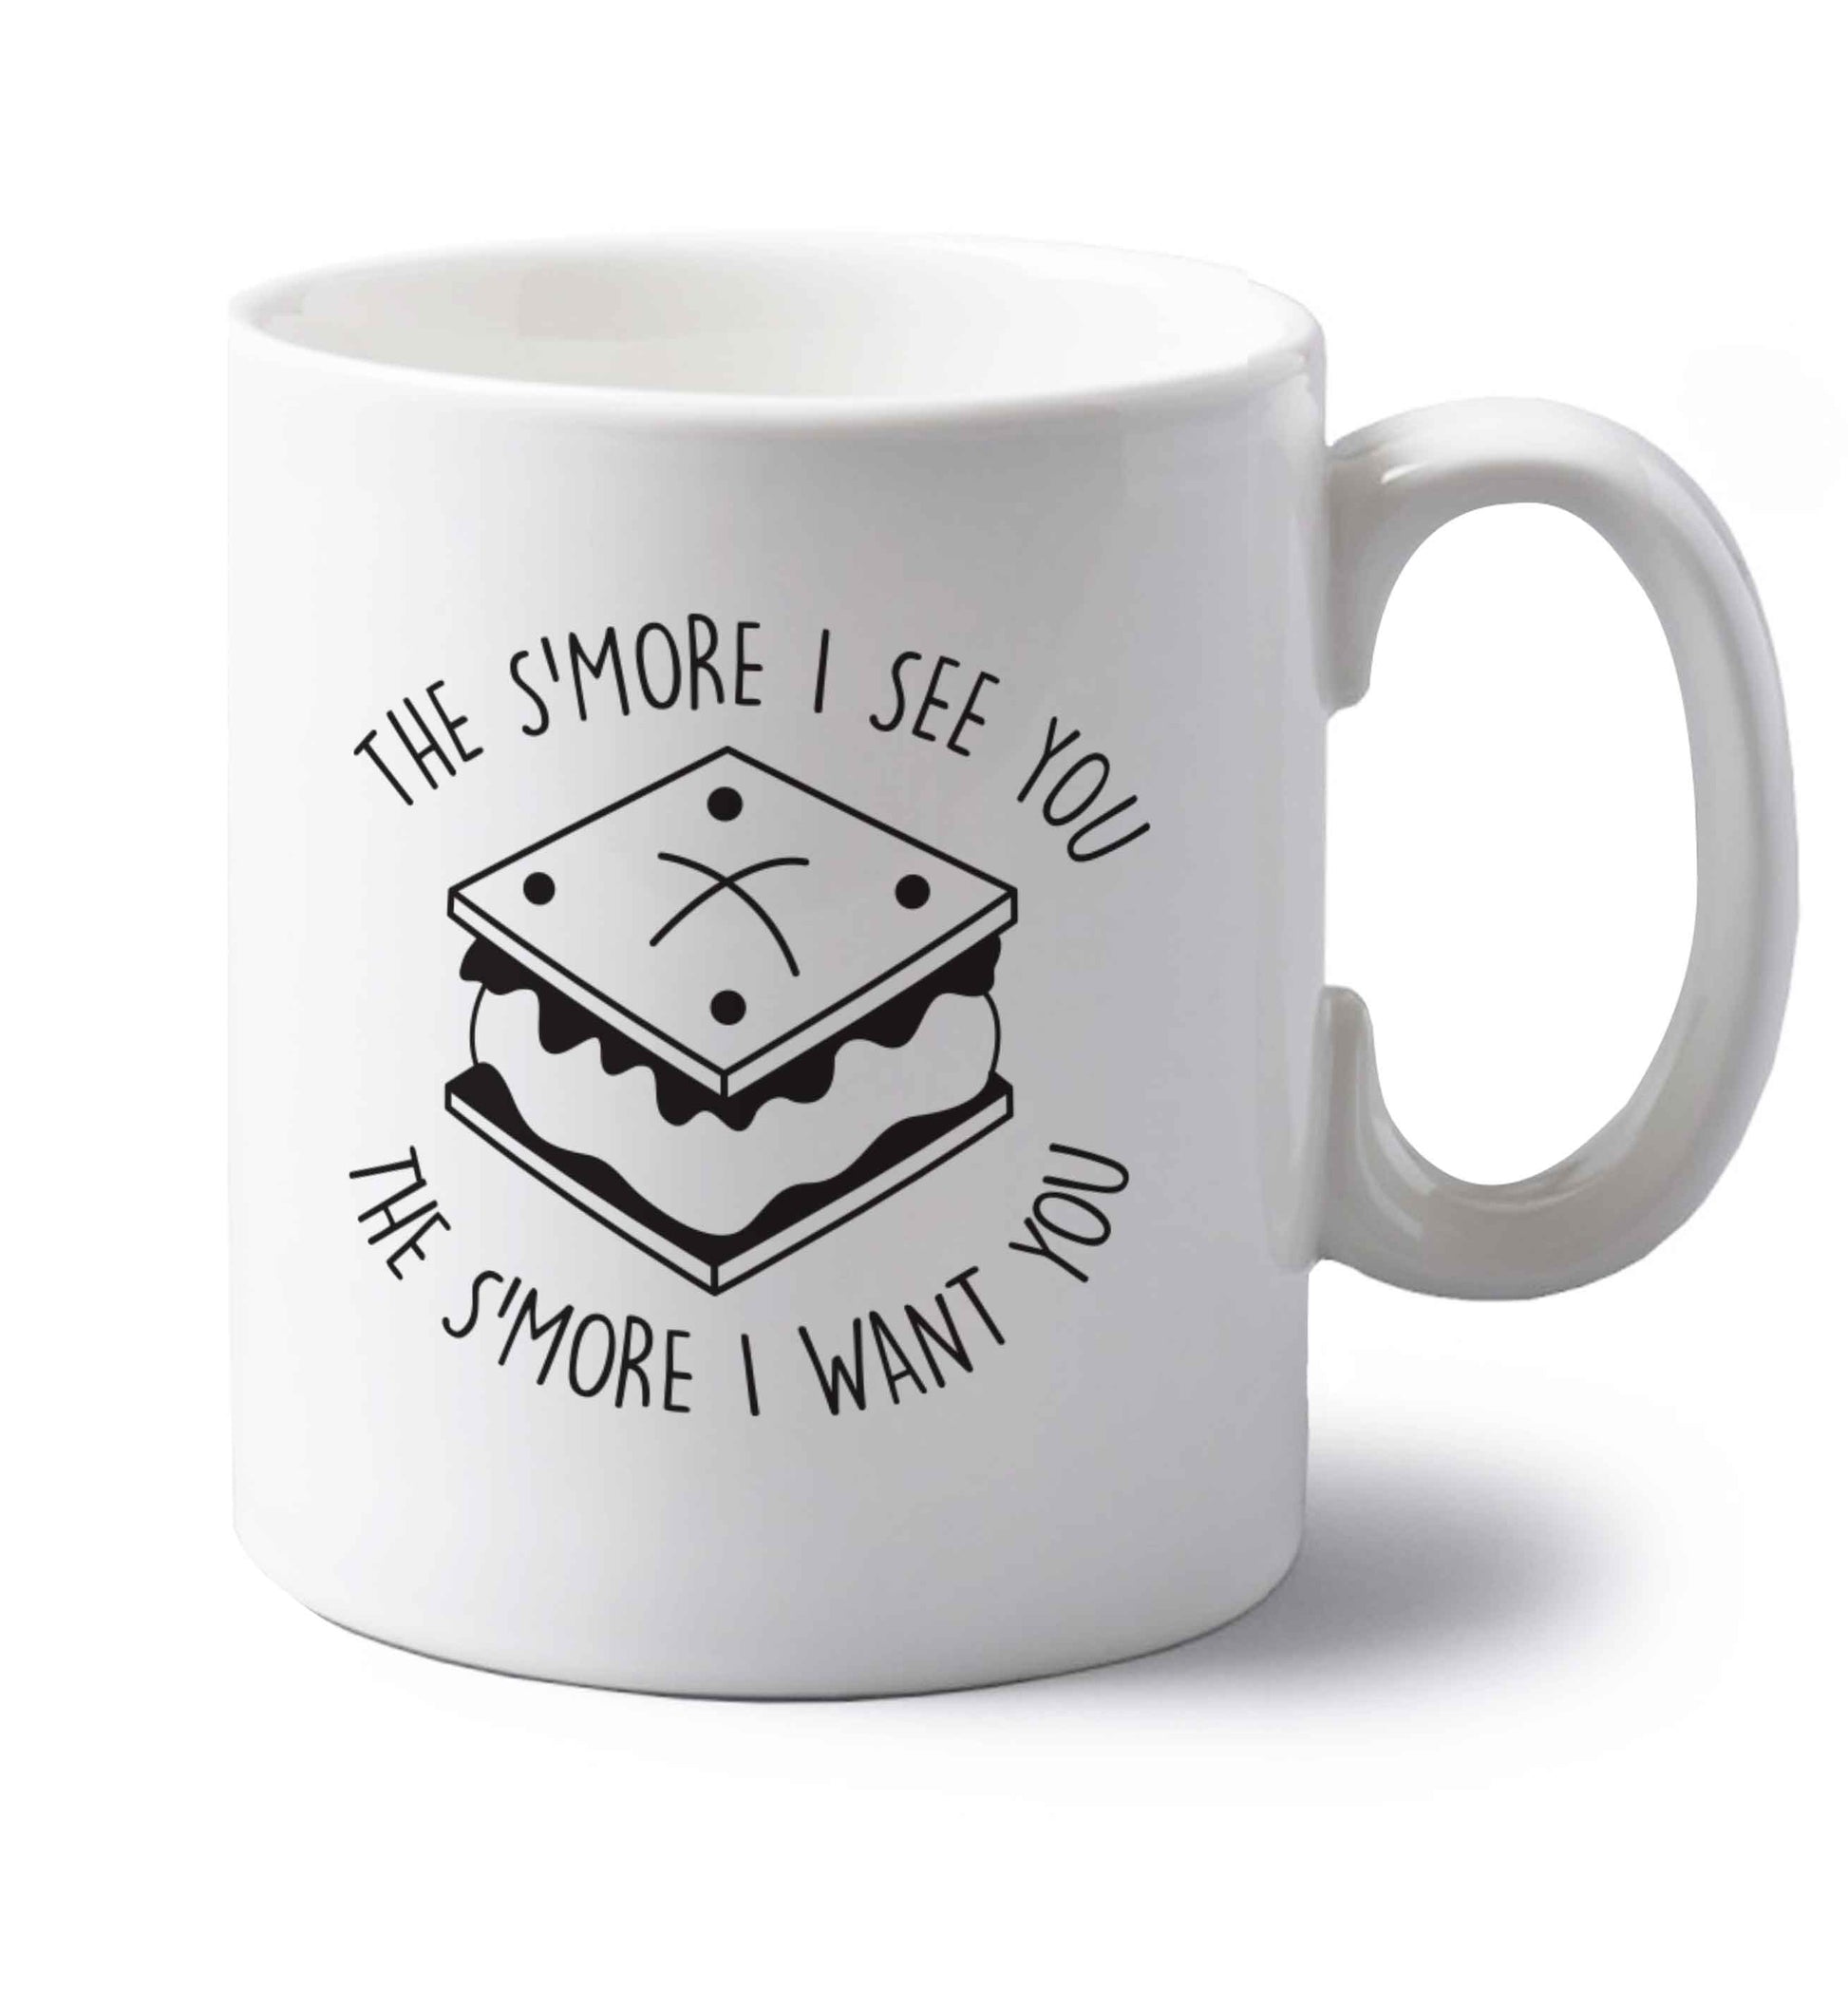 The s'more I see you the s'more I want you left handed white ceramic mug 